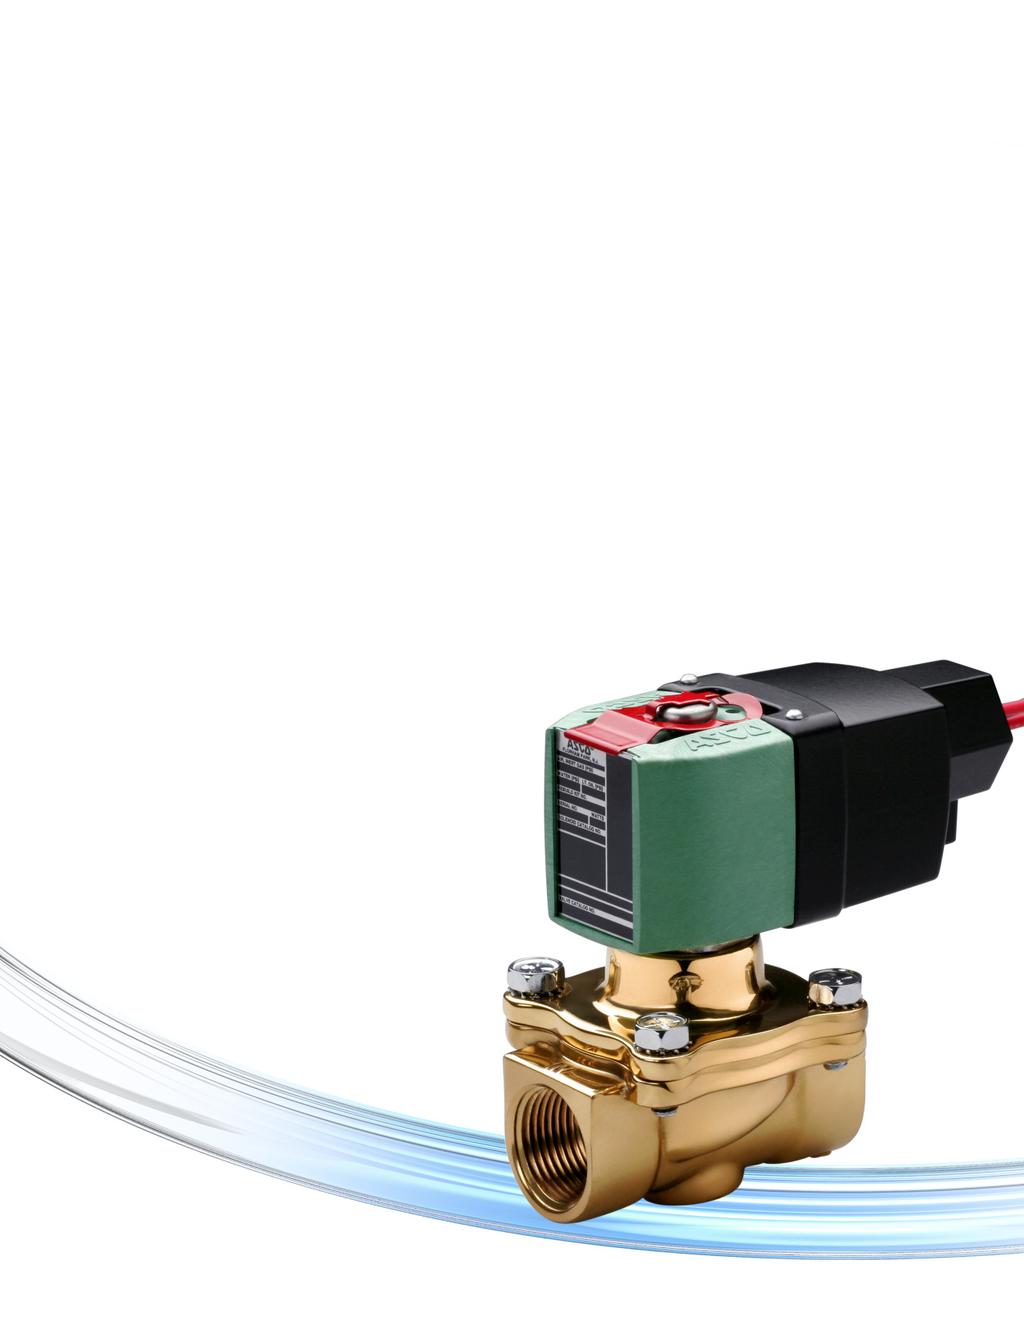 Redat Next eneration lectronically nhanced Solenoid Valve Technology Redat Next eneration is the future of solenoid valve technology, designed and manufactured to provide new capabilities.